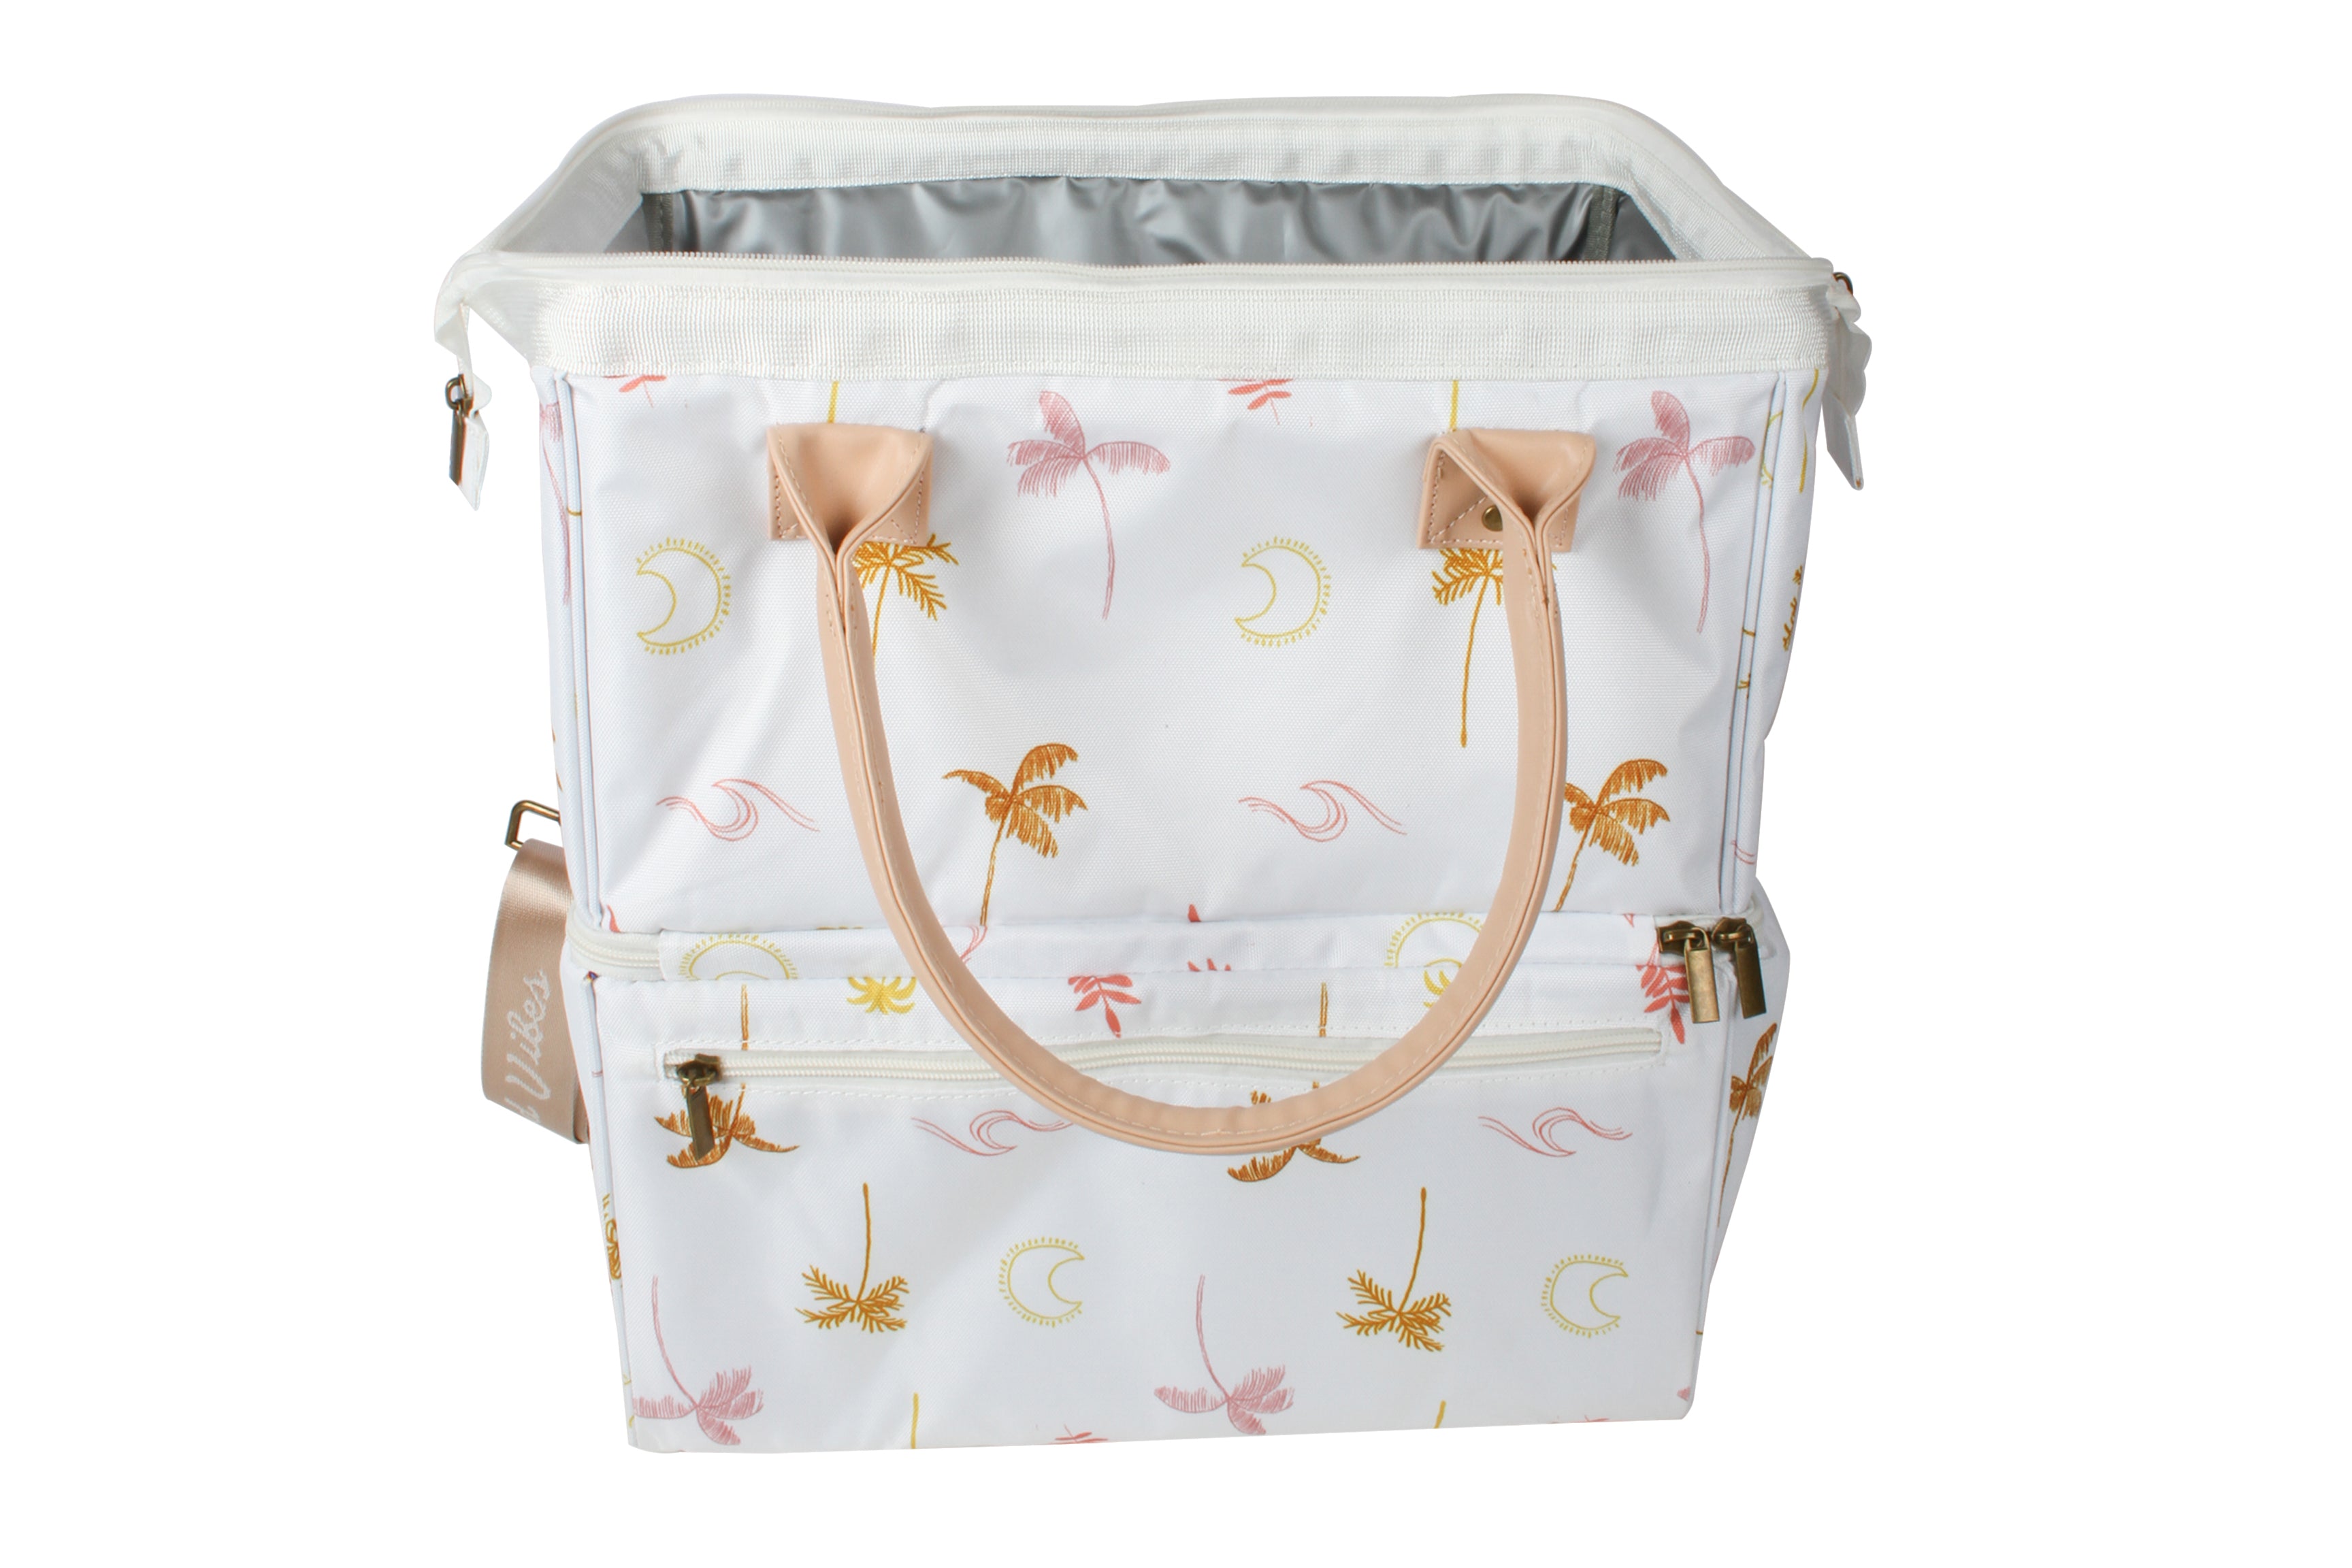 INSULATED PICNIC COOLER BAG 40X28X27CM - COCO AND WAVES